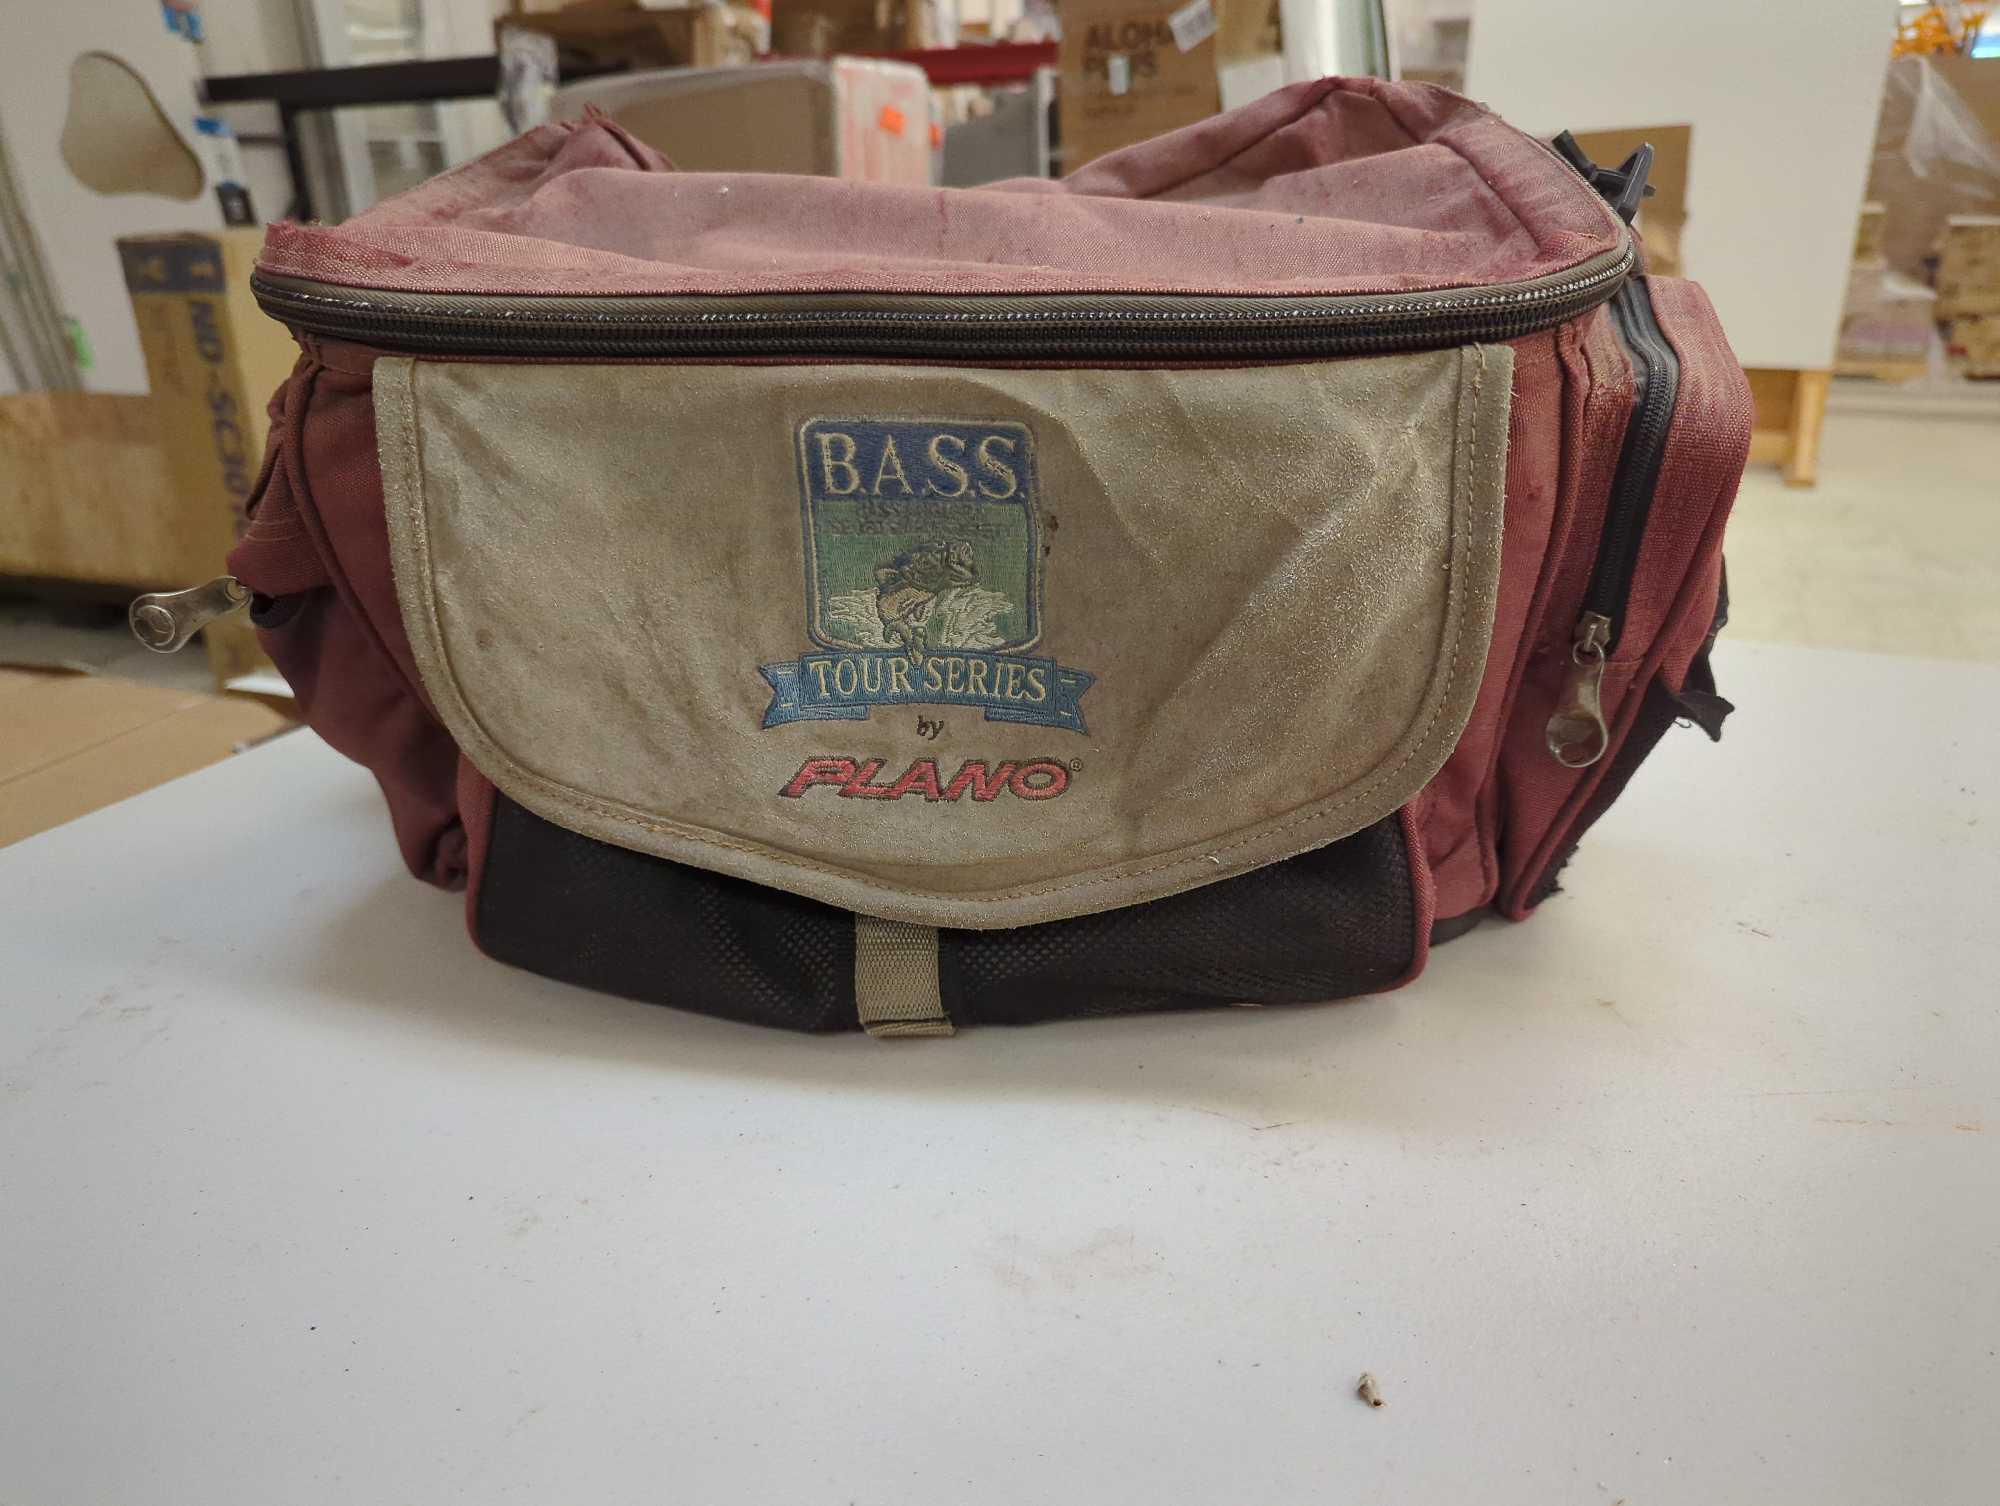 PLANO Tour Series BASS Zippered Fishing Tackle Box Bag and contents including: 3 tackle boxes